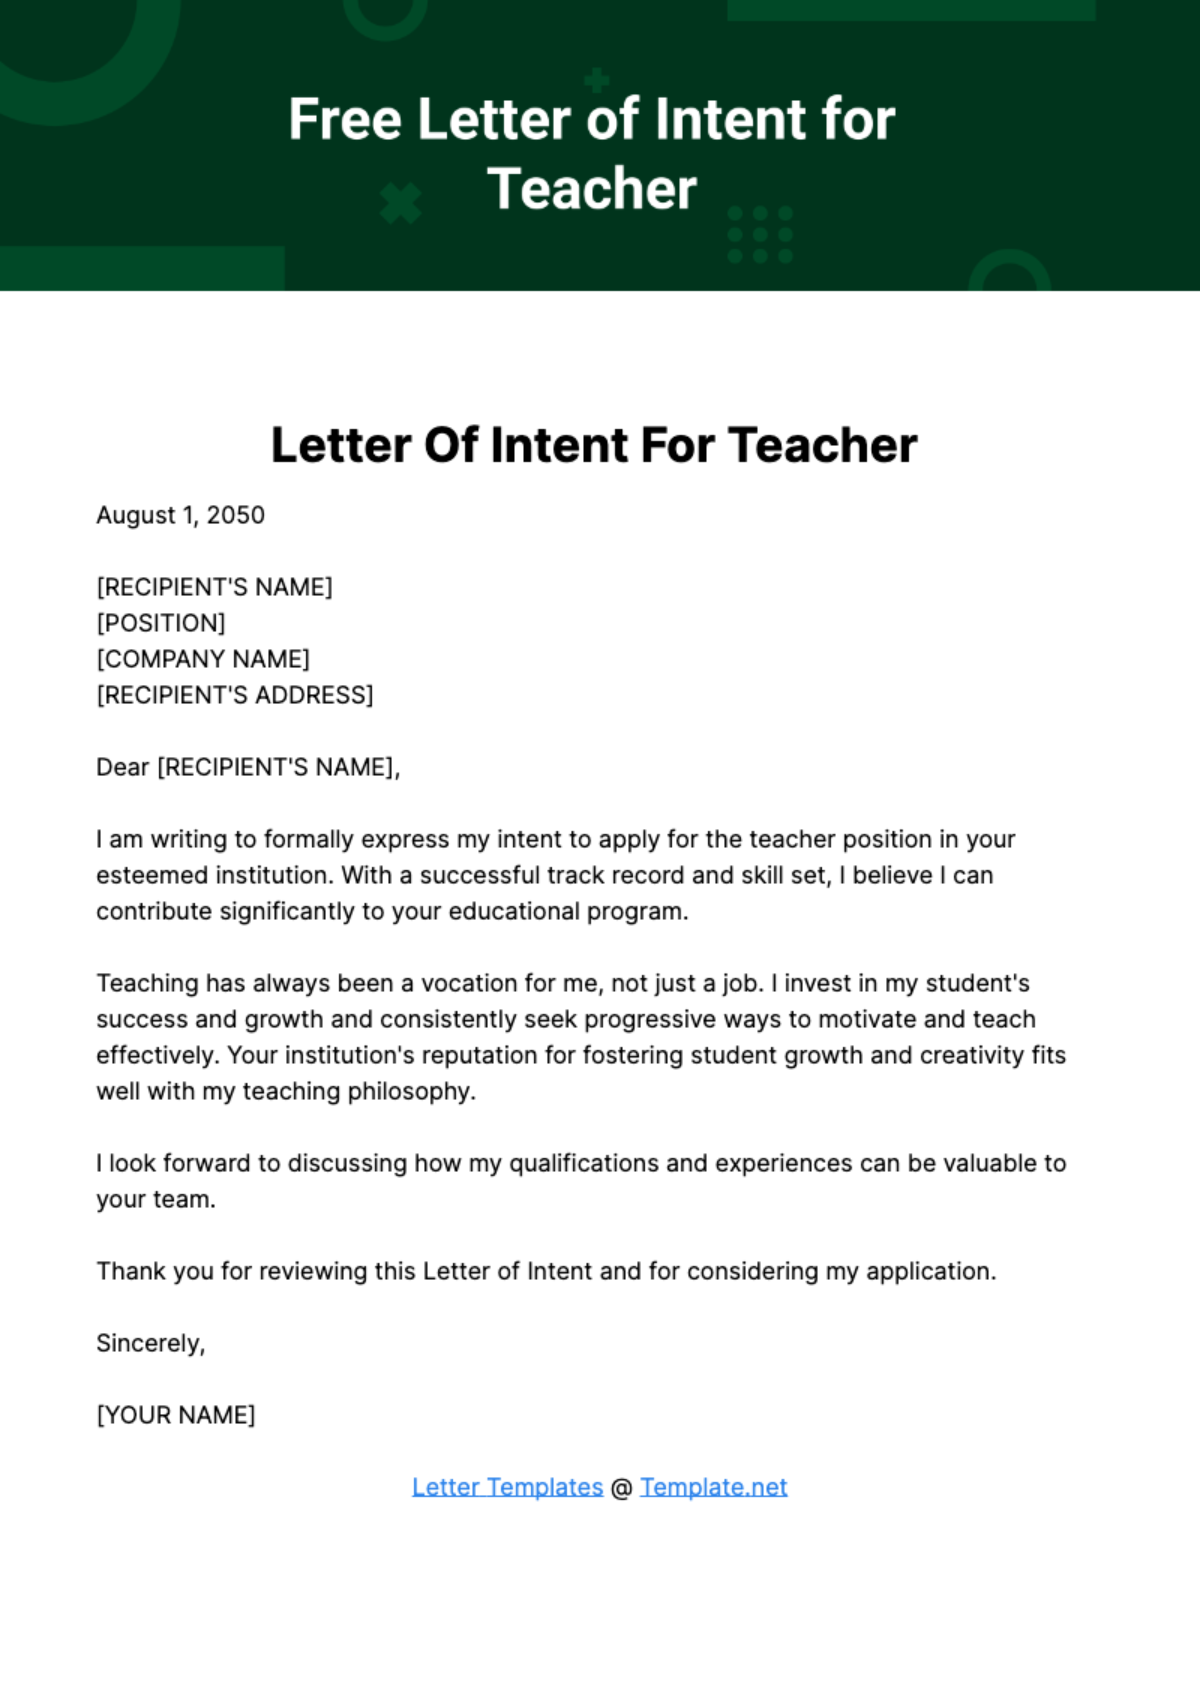 Free Letter of Intent for Teacher Template